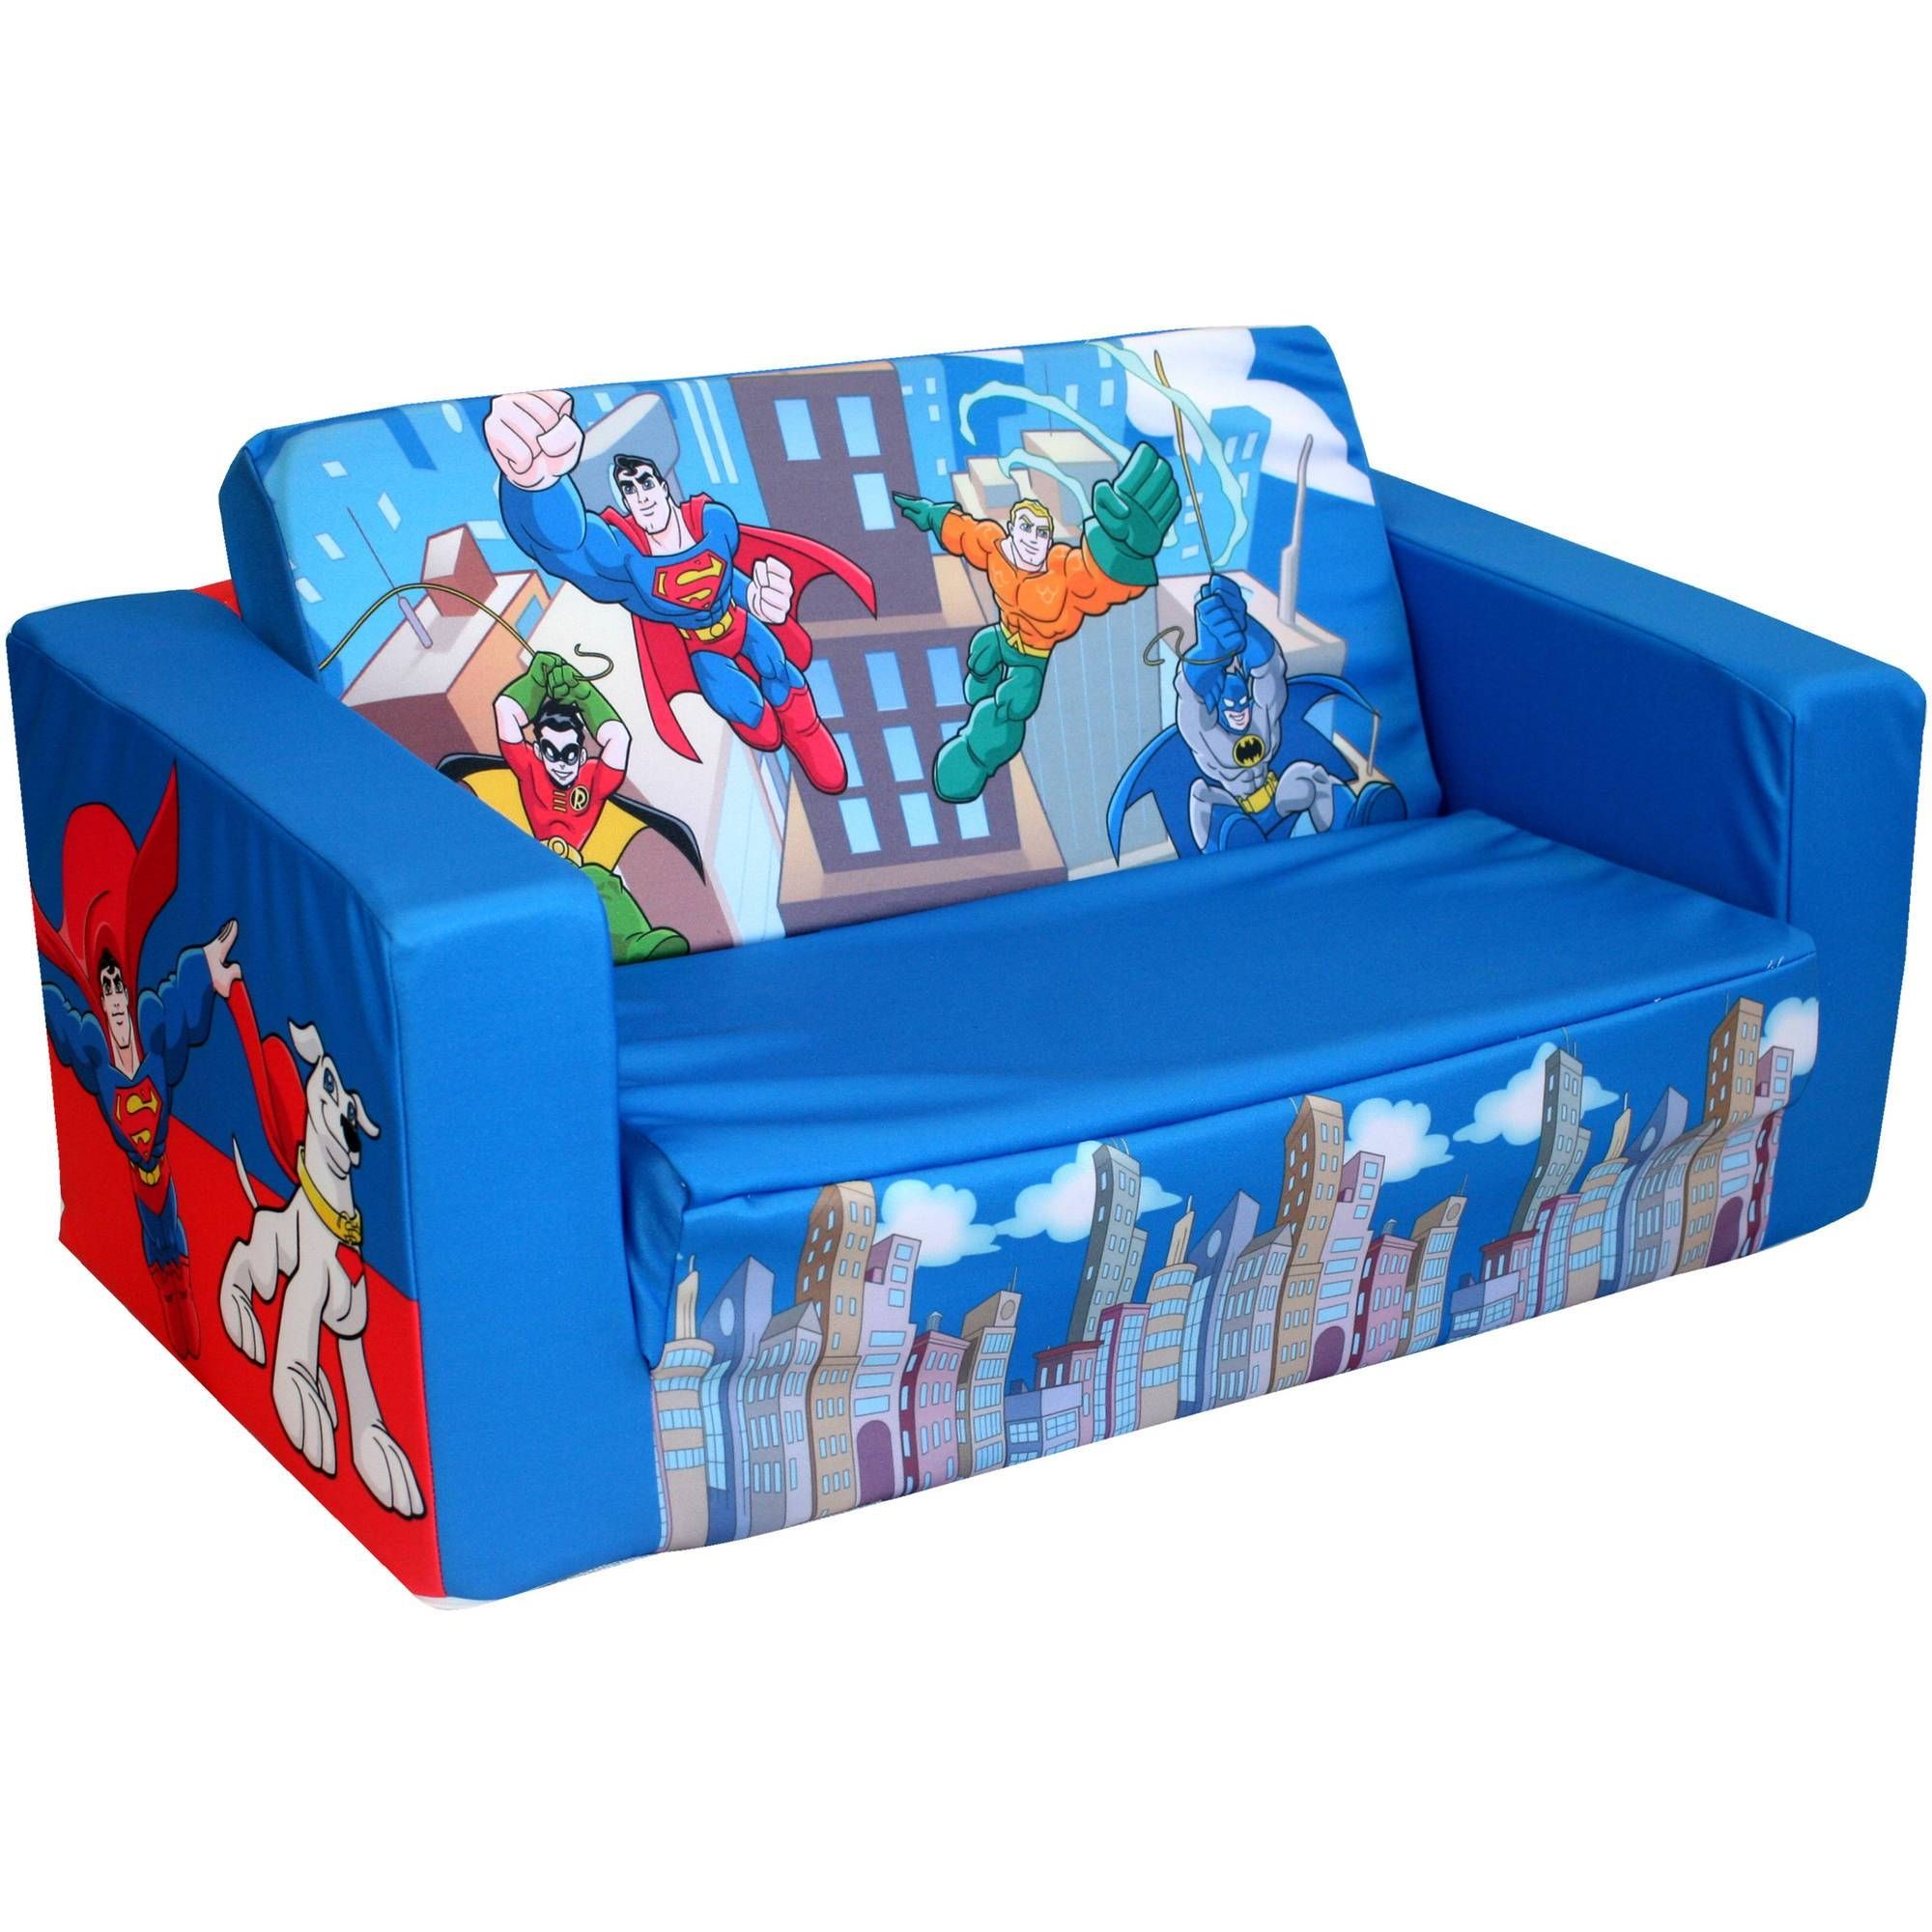 2021 Latest Flip Out Sofa for Kids